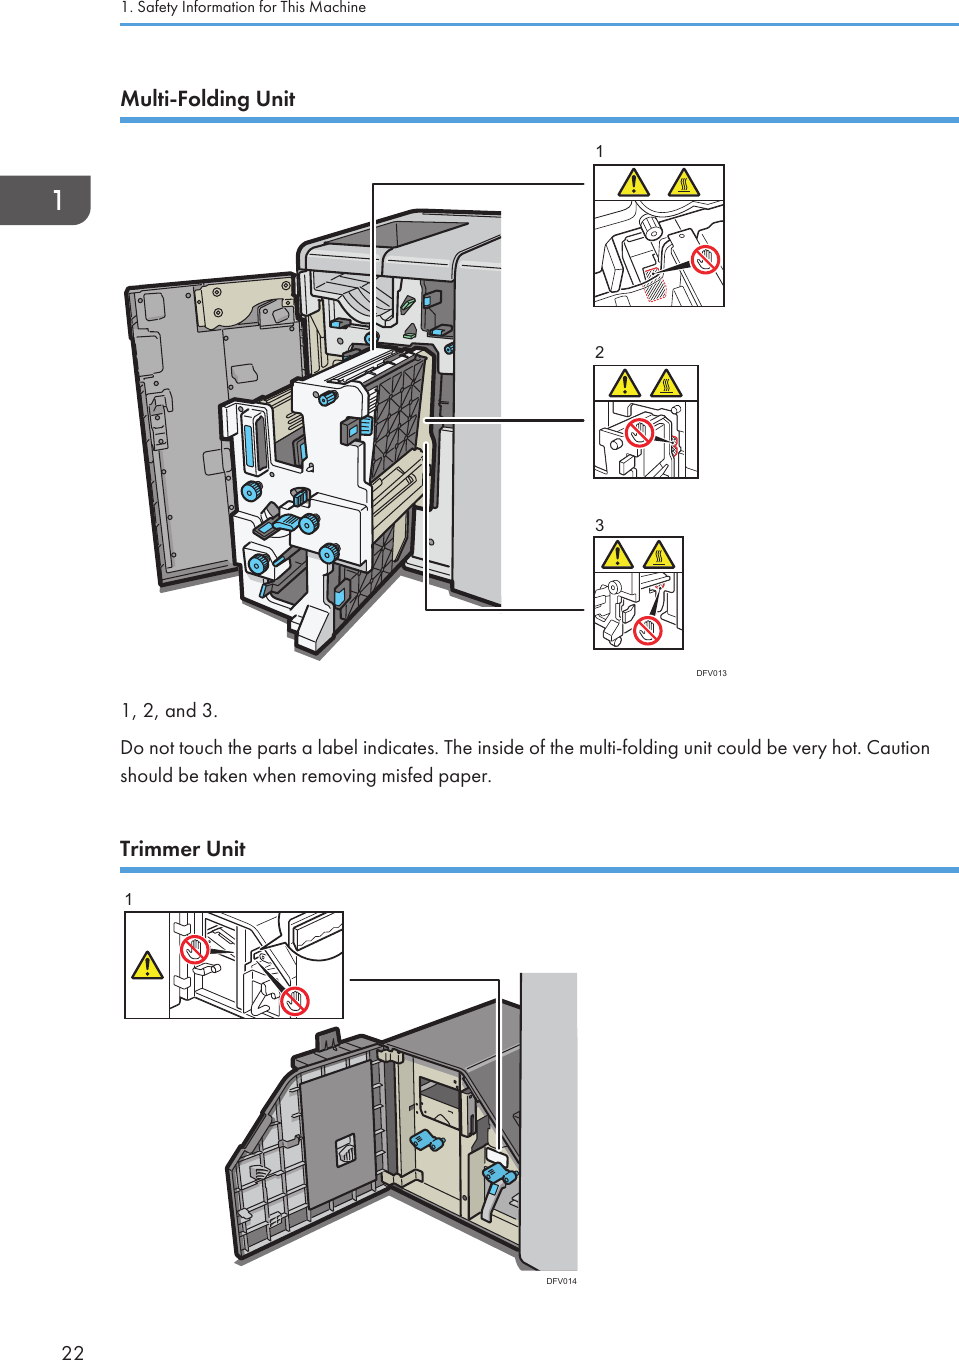 Multi-Folding Unit123DFV0131, 2, and 3.Do not touch the parts a label indicates. The inside of the multi-folding unit could be very hot. Caution should be taken when removing misfed paper.Trimmer Unit1DFV0141. Safety Information for This Machine22